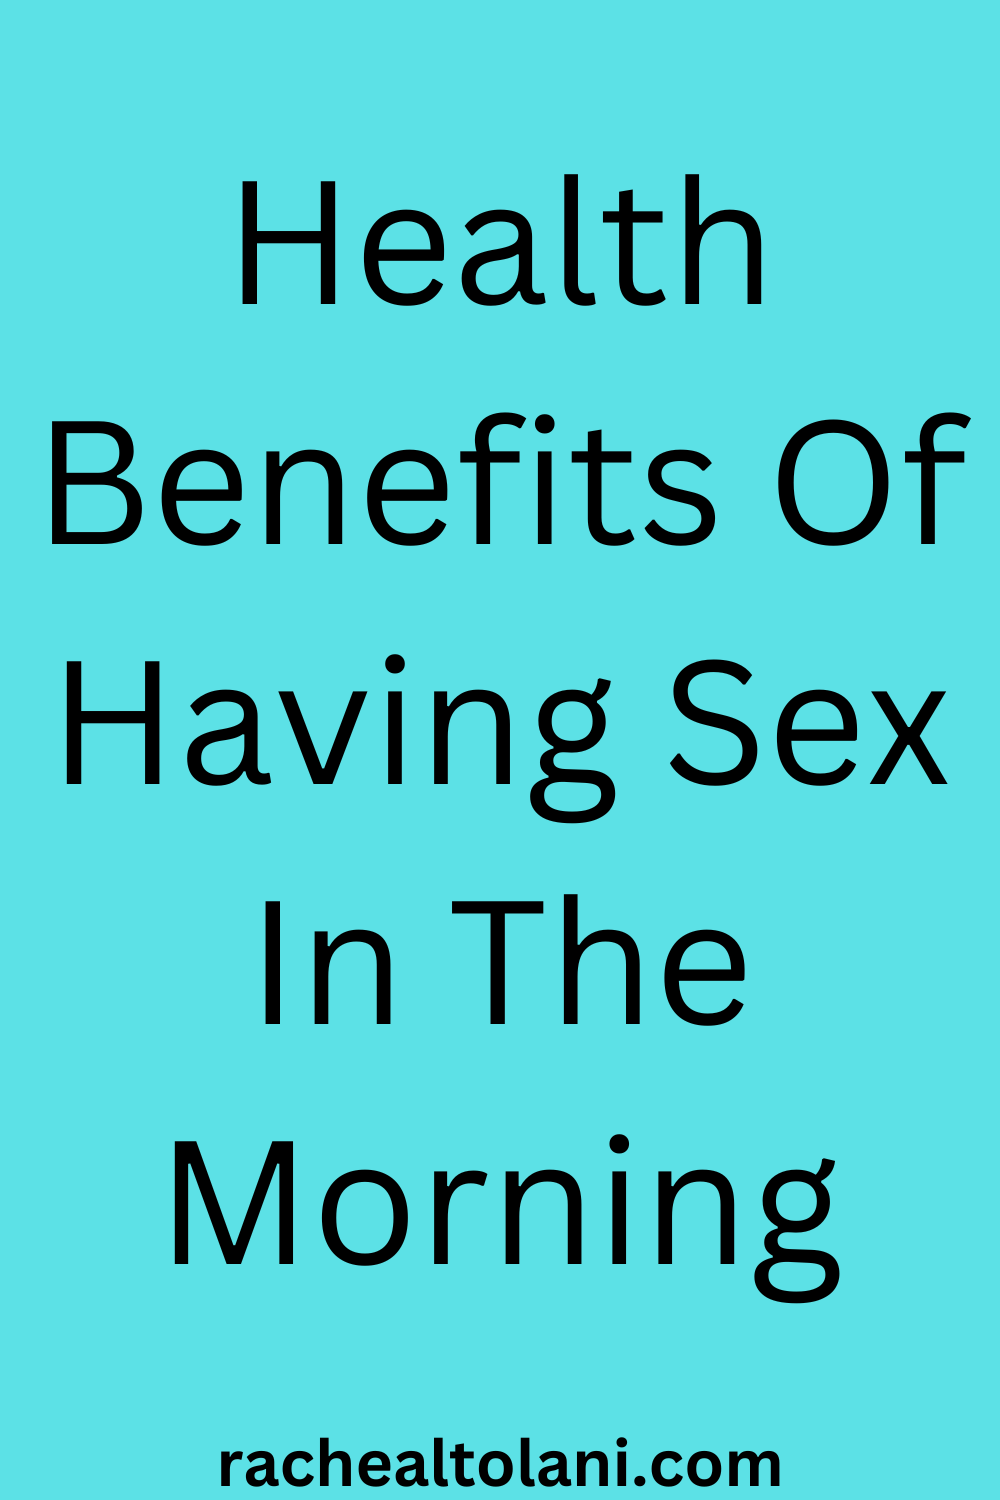 Benefits of morning sex